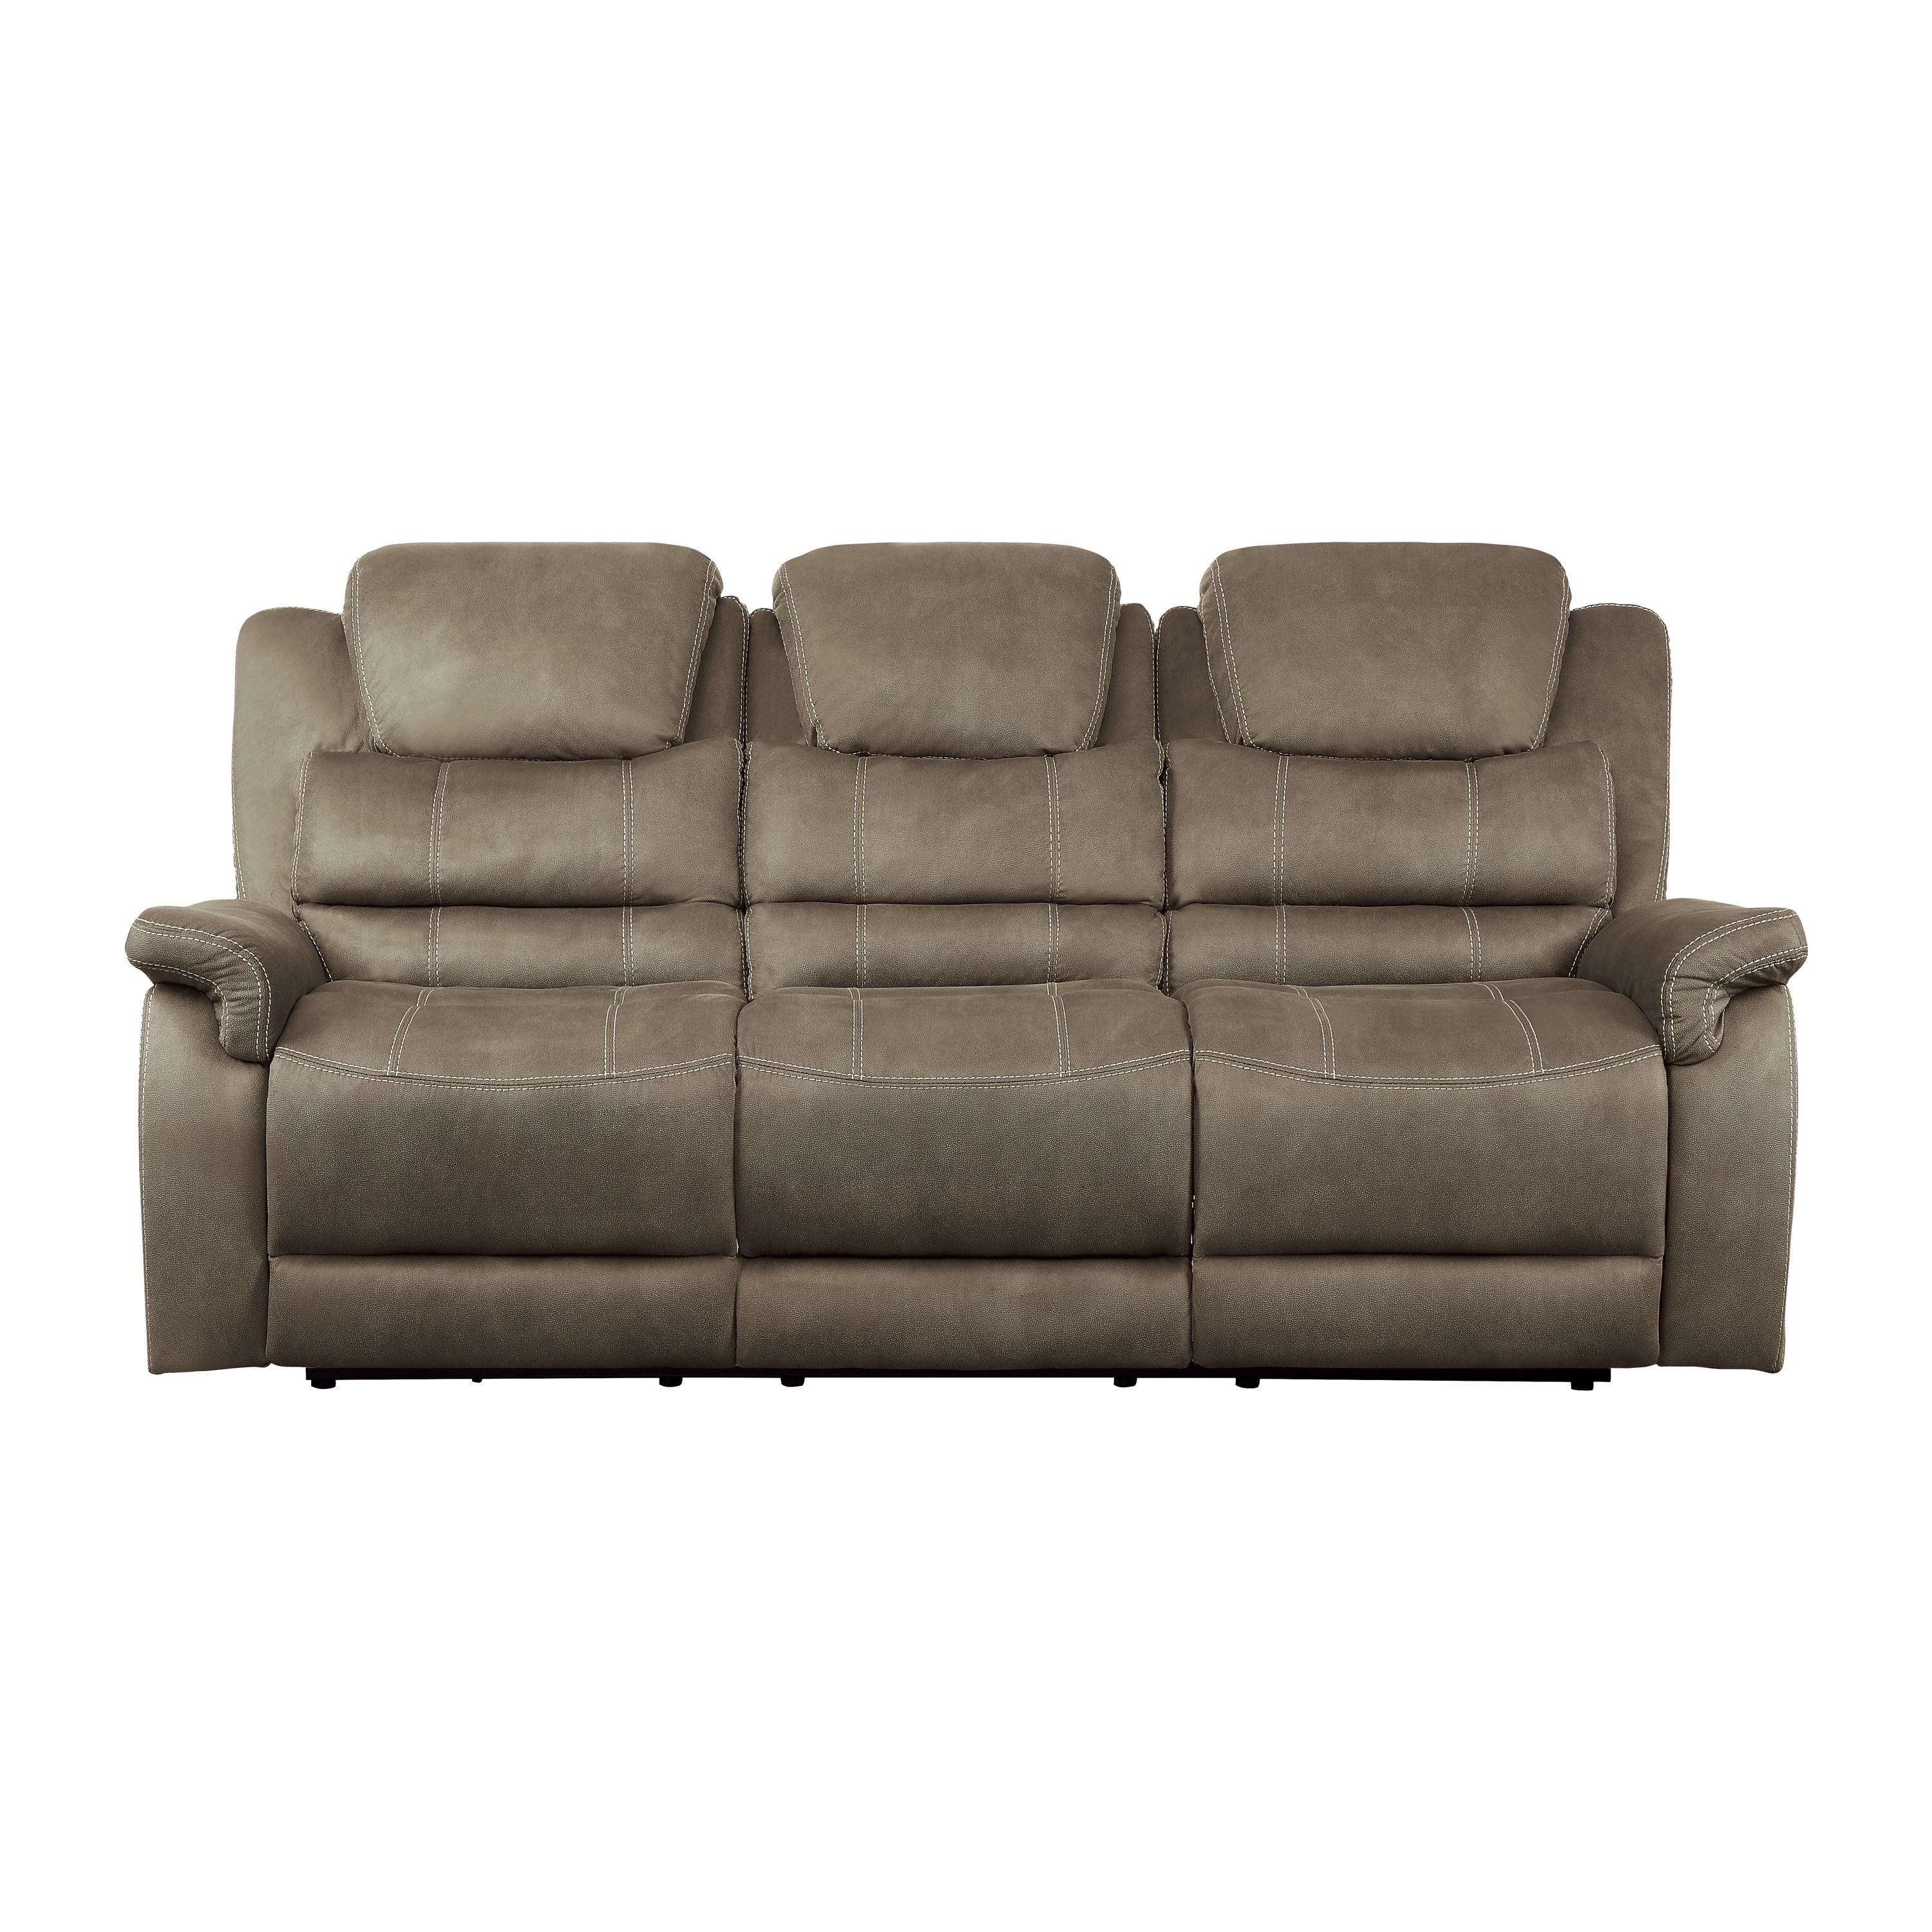 Transitional Power Reclining Sofa 9848BR-3PWH Shola 9848BR-3PWH in Brown Microfiber